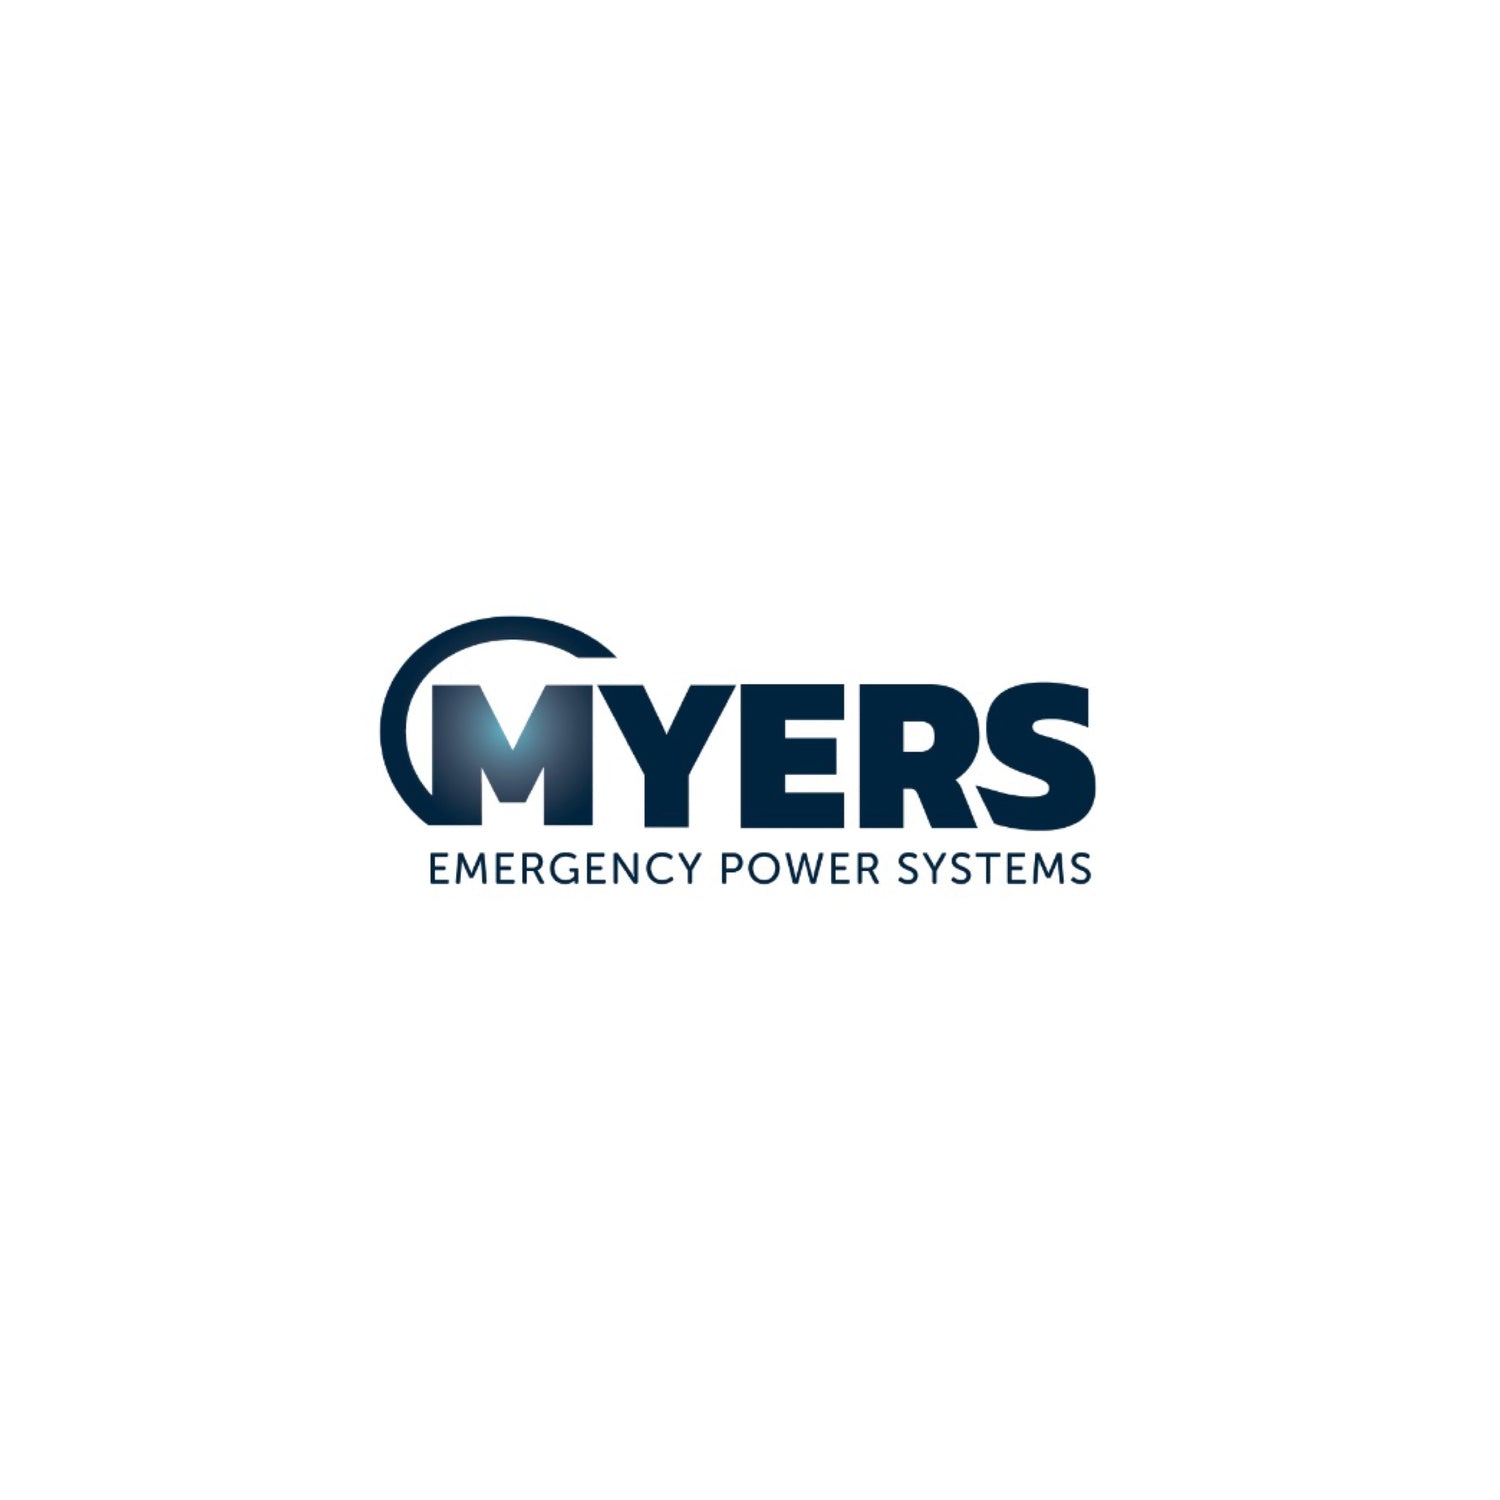 MYERS EMERGENCY POWER SYSTEMS